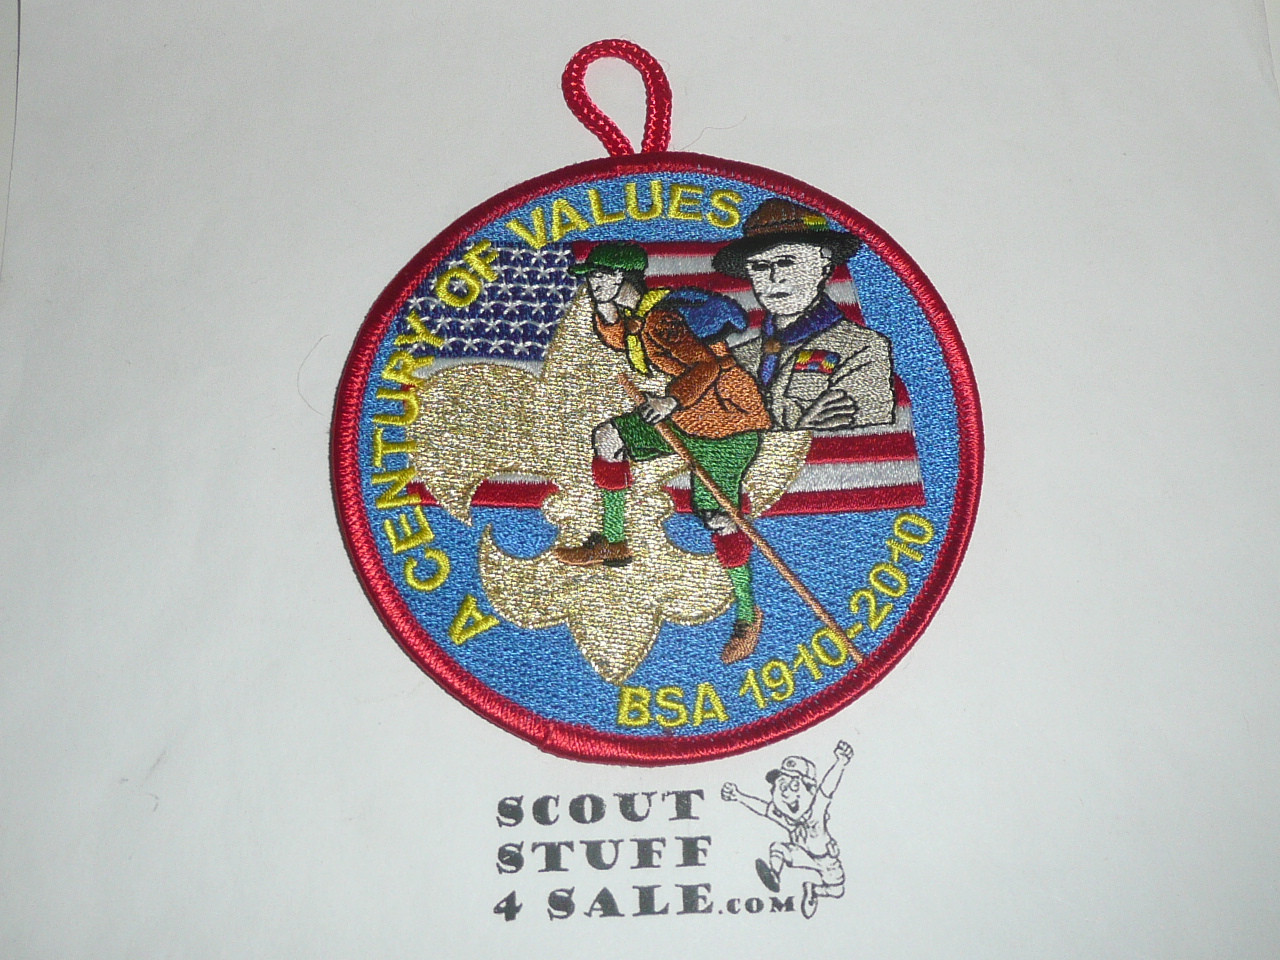 2010 100th Boy Scout Anniversary Commemorative Patch, A Century of Values